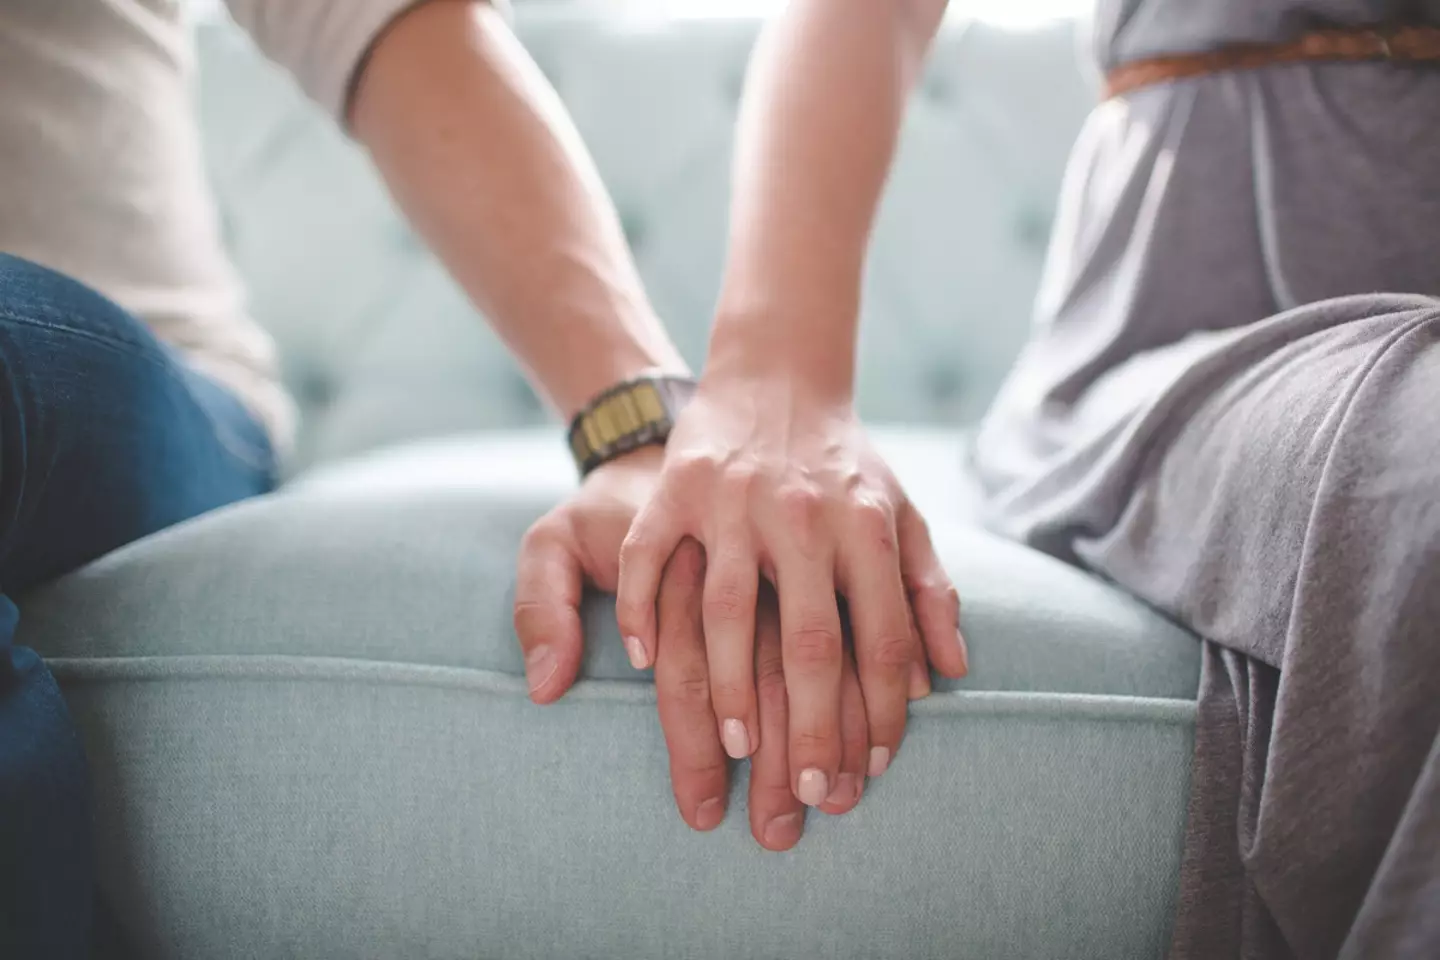 A sex expert has revealed why being 'monogamish' can contribute to a healthy relationship.